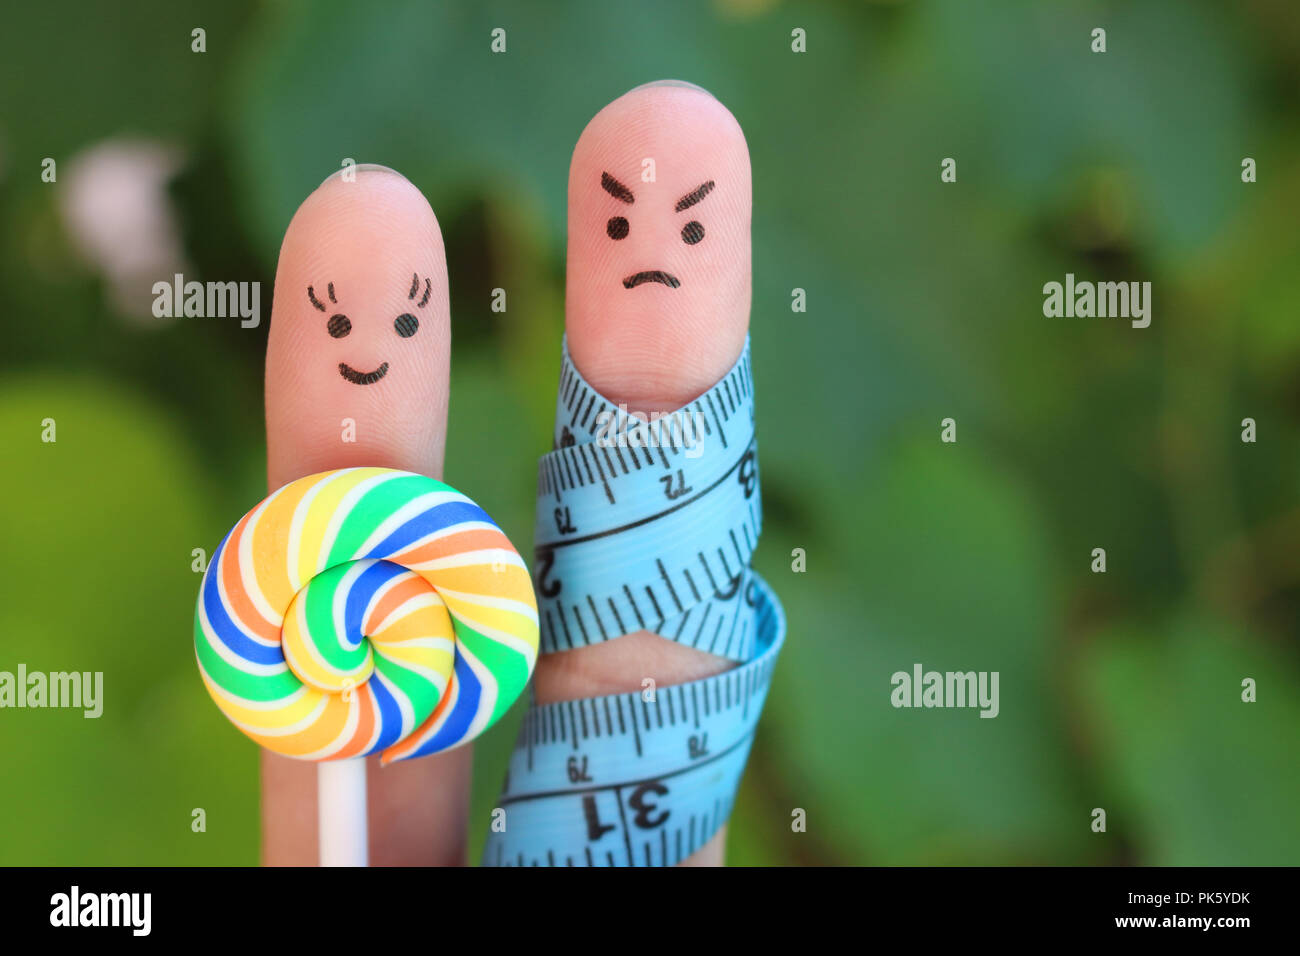 Finger art of couple with meter and candy. Concept of man angry because woman wants to lose weight. Stock Photo